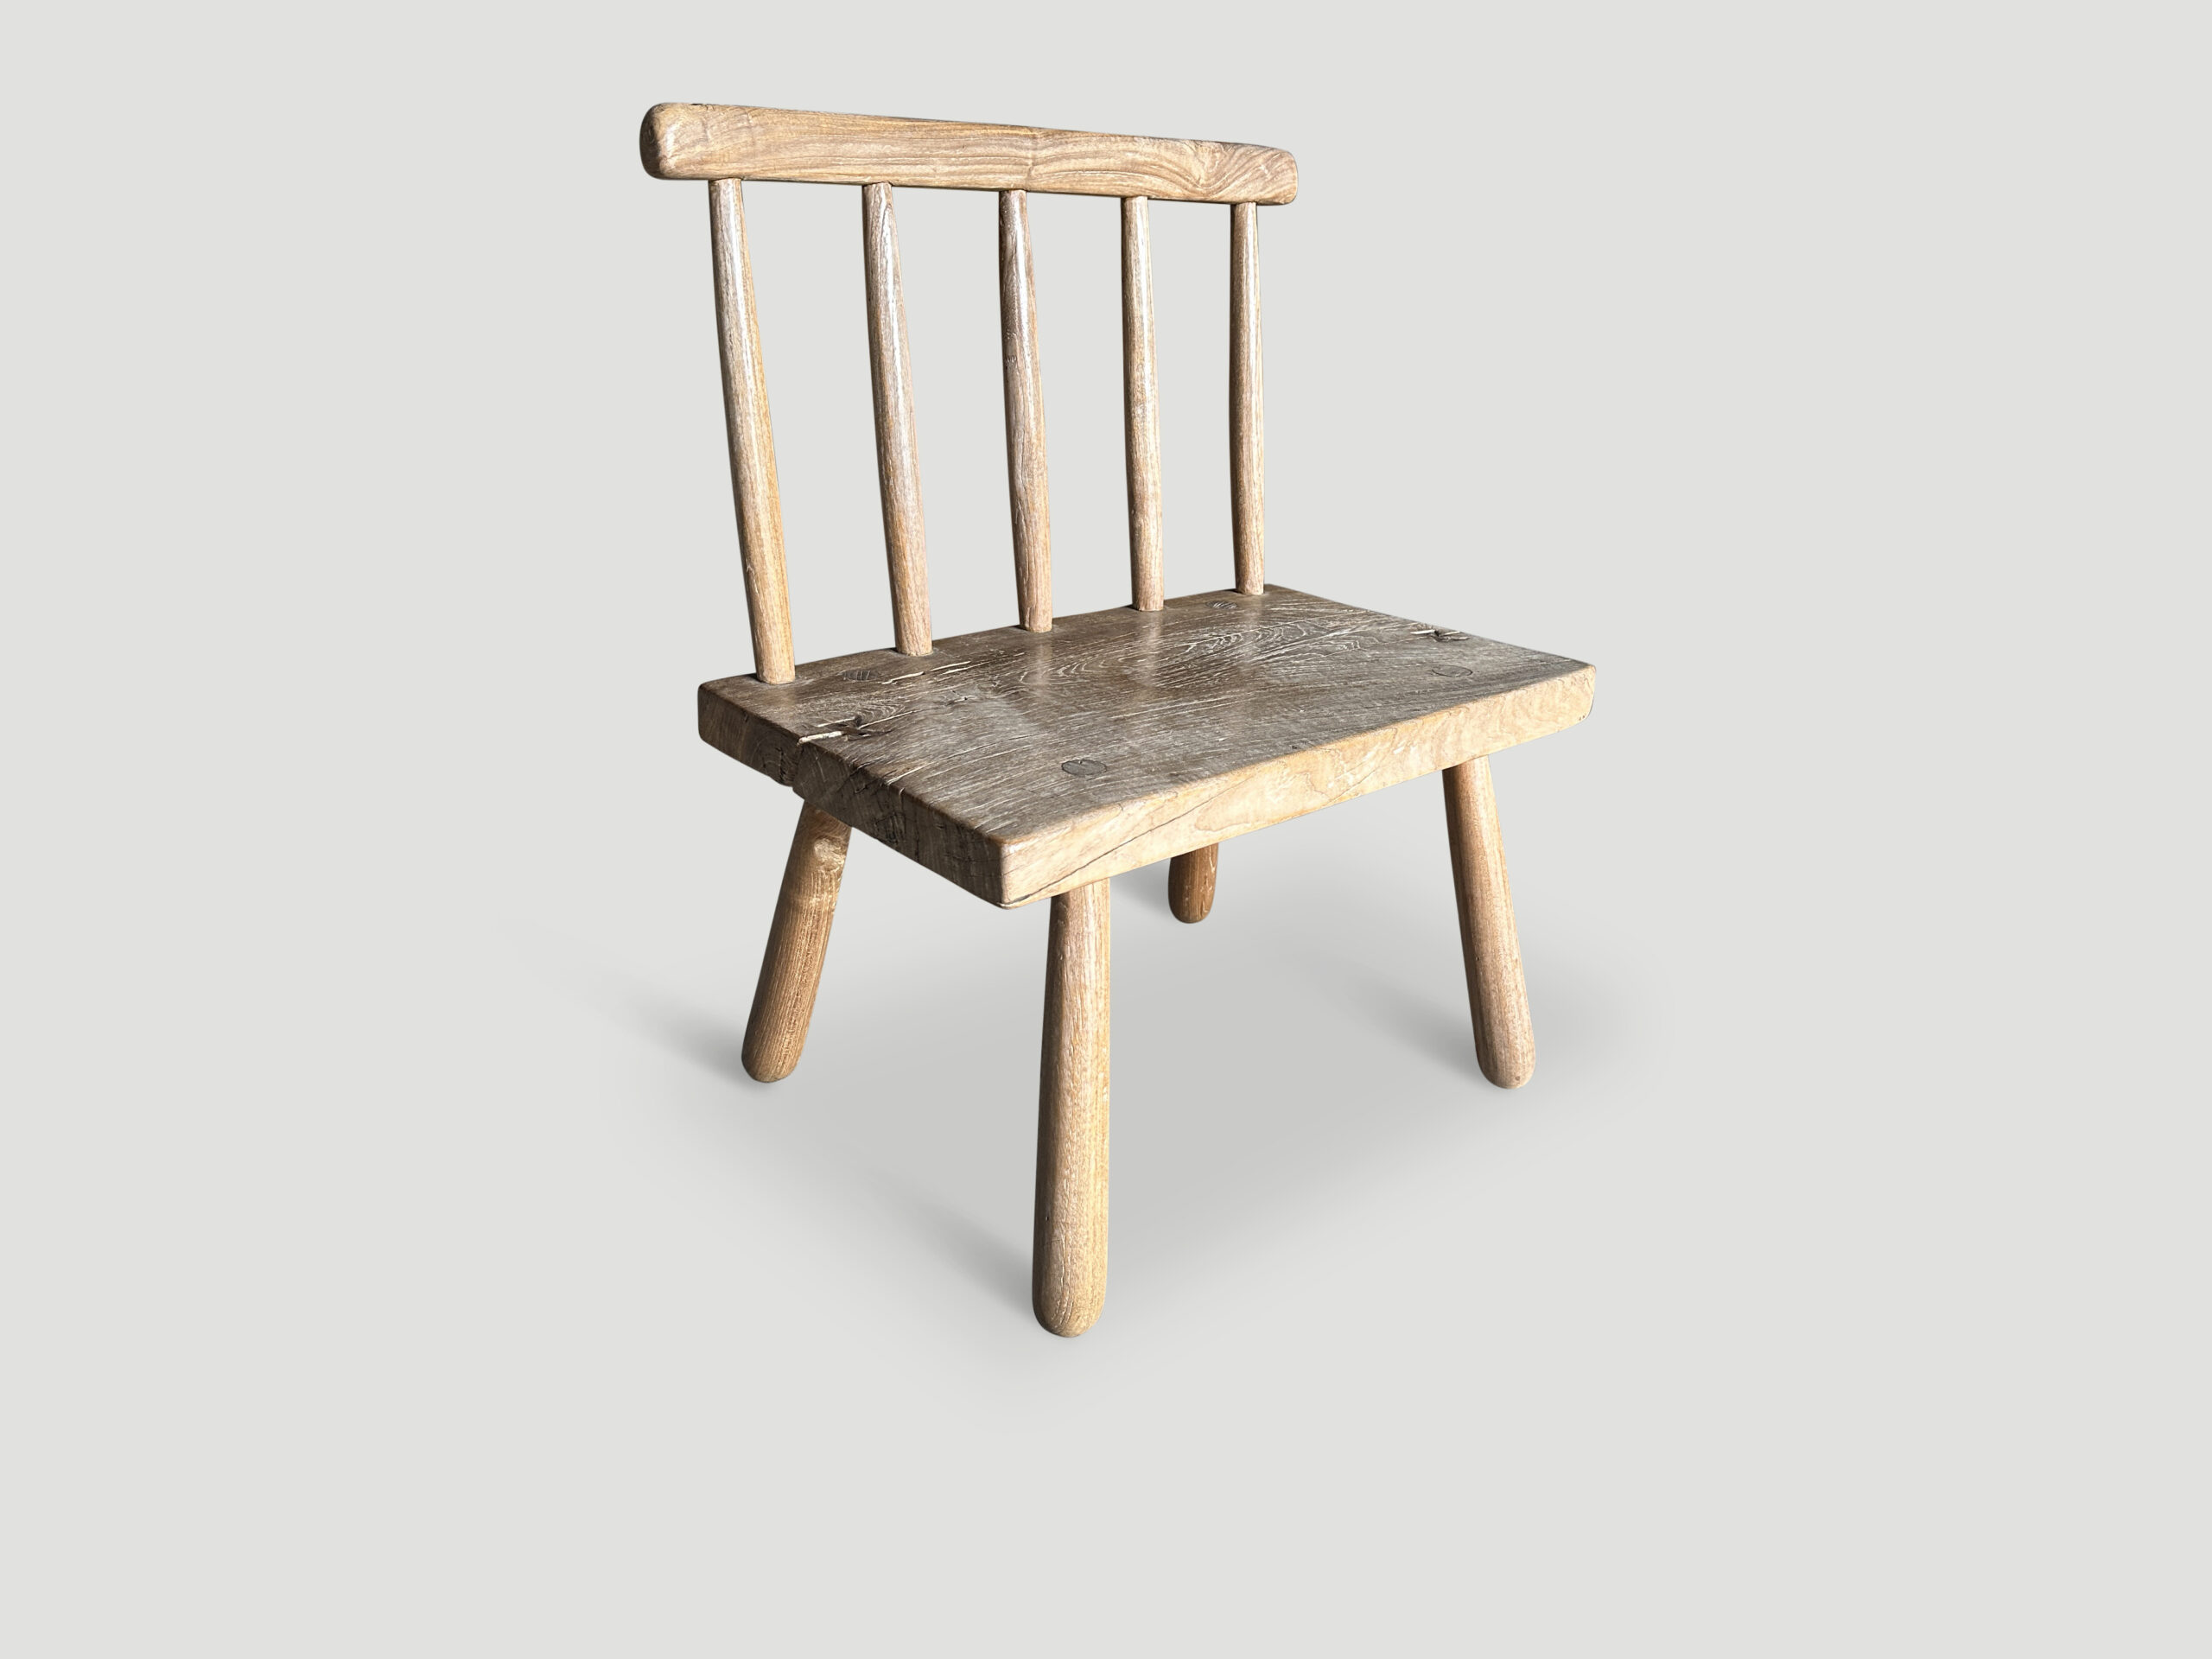 Minimalist chair or side table